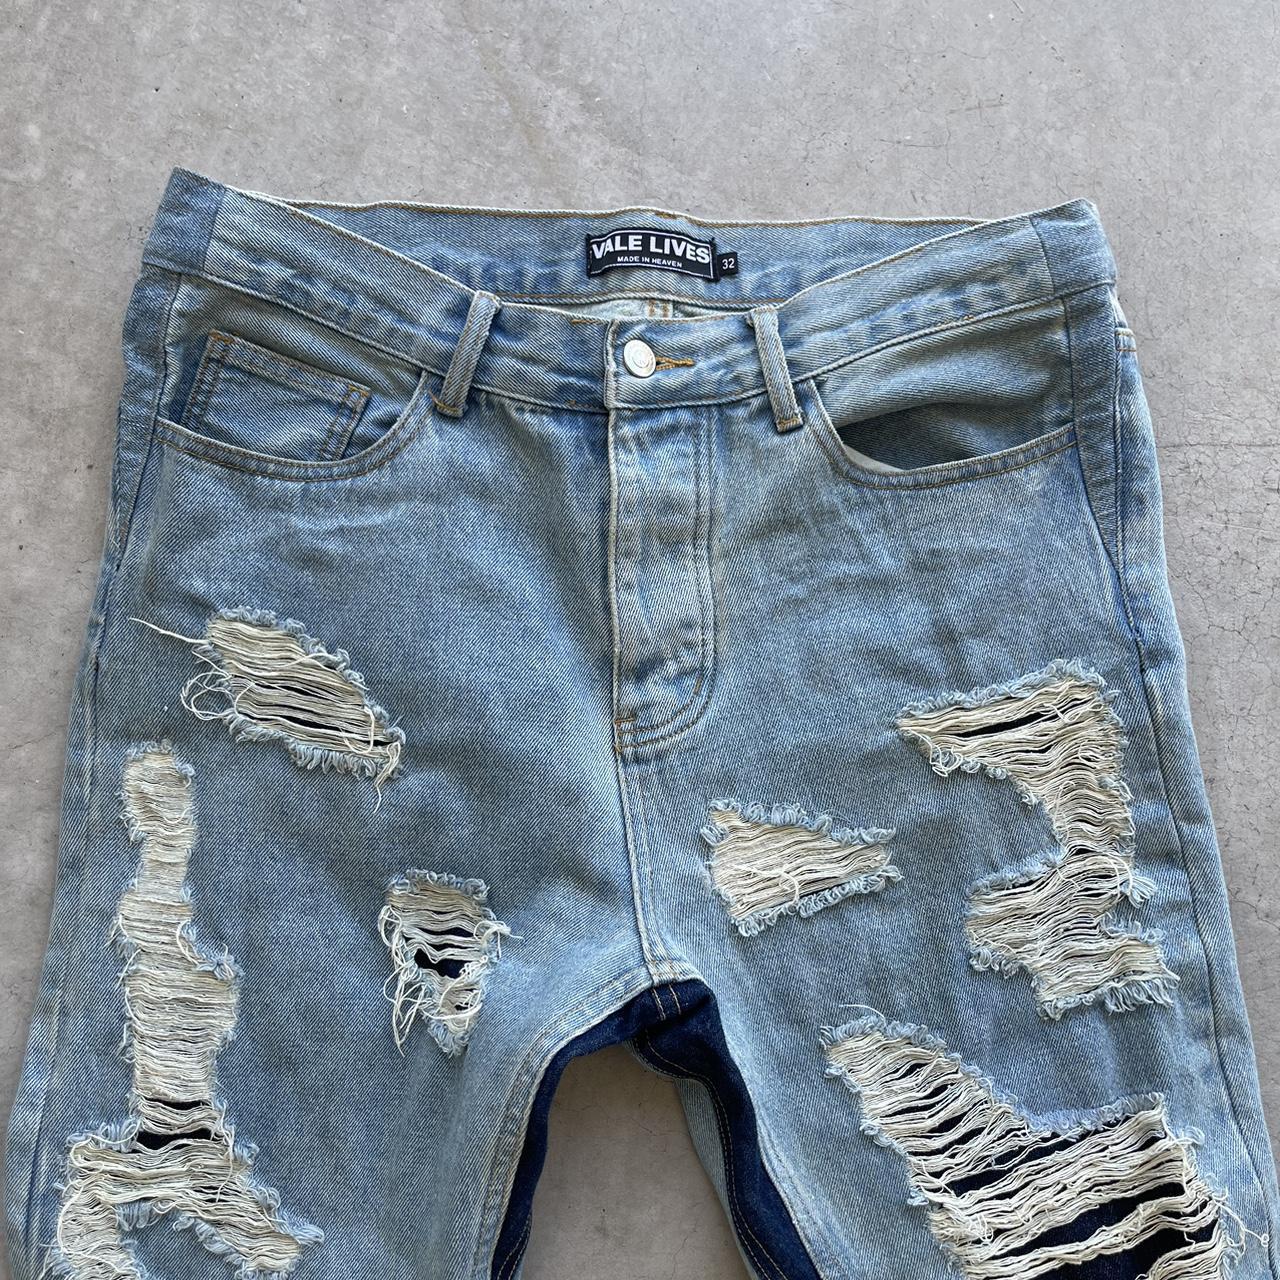 Vale Lives old season of denim. Not sure on the year... - Depop